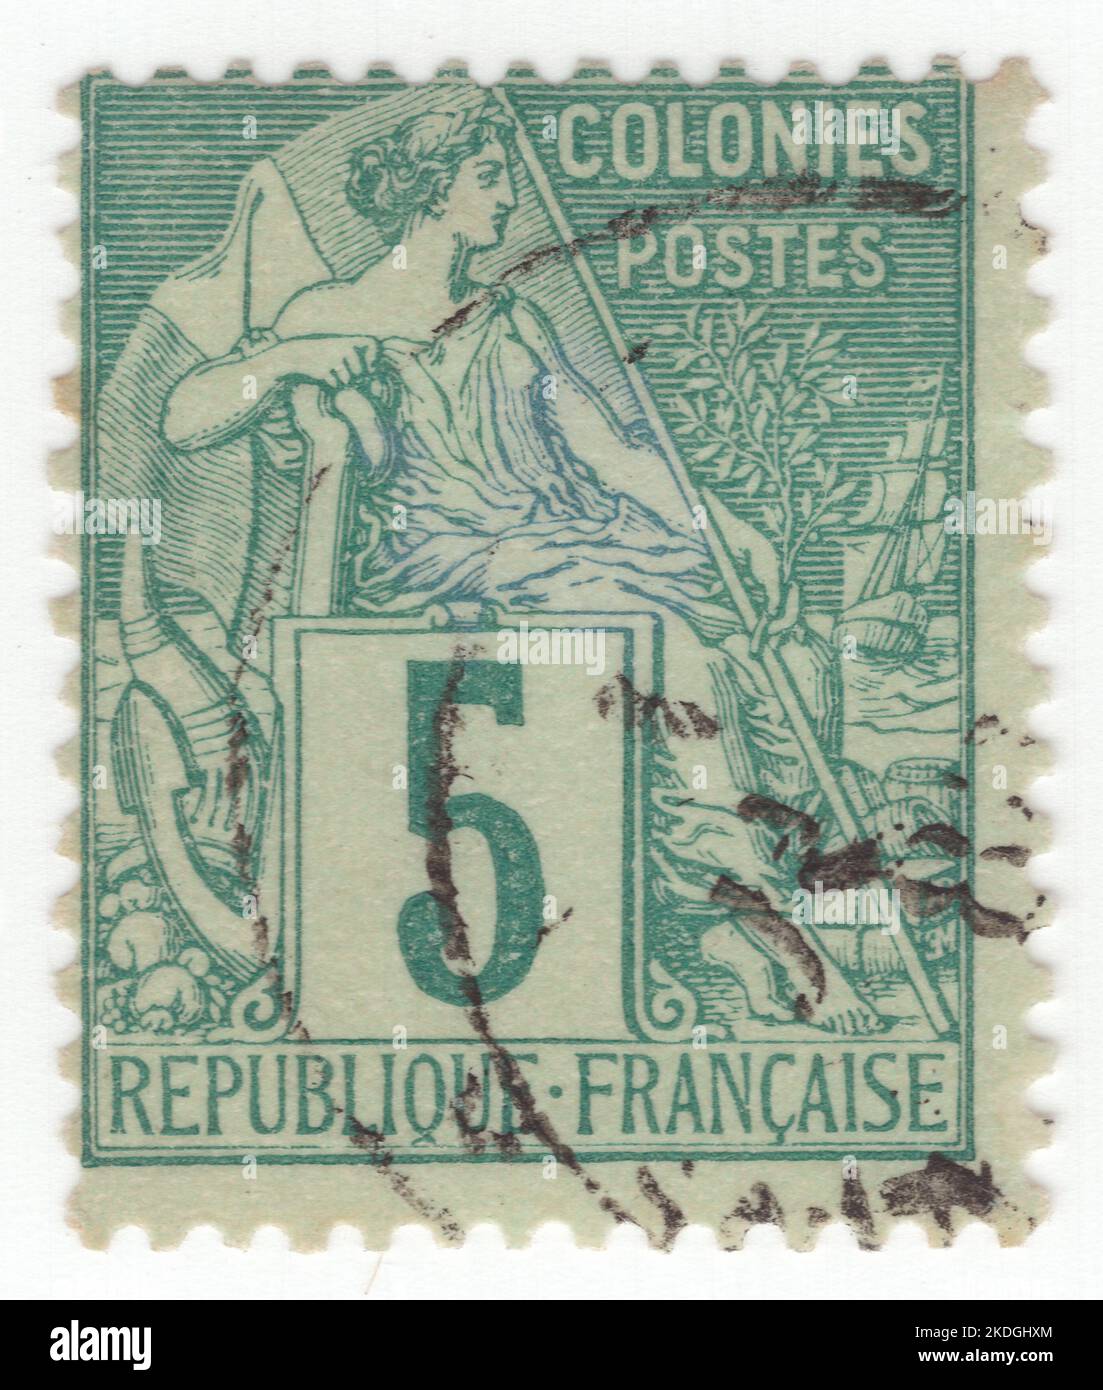 FRENCH COLONIES - 1881: An 5 centimes green on greenish postage stamp depicting allegory female figure 'Commerce' sitting alone and inscribed 'COLONIES'. Series French Colonies by Alphee Dubois Stock Photo